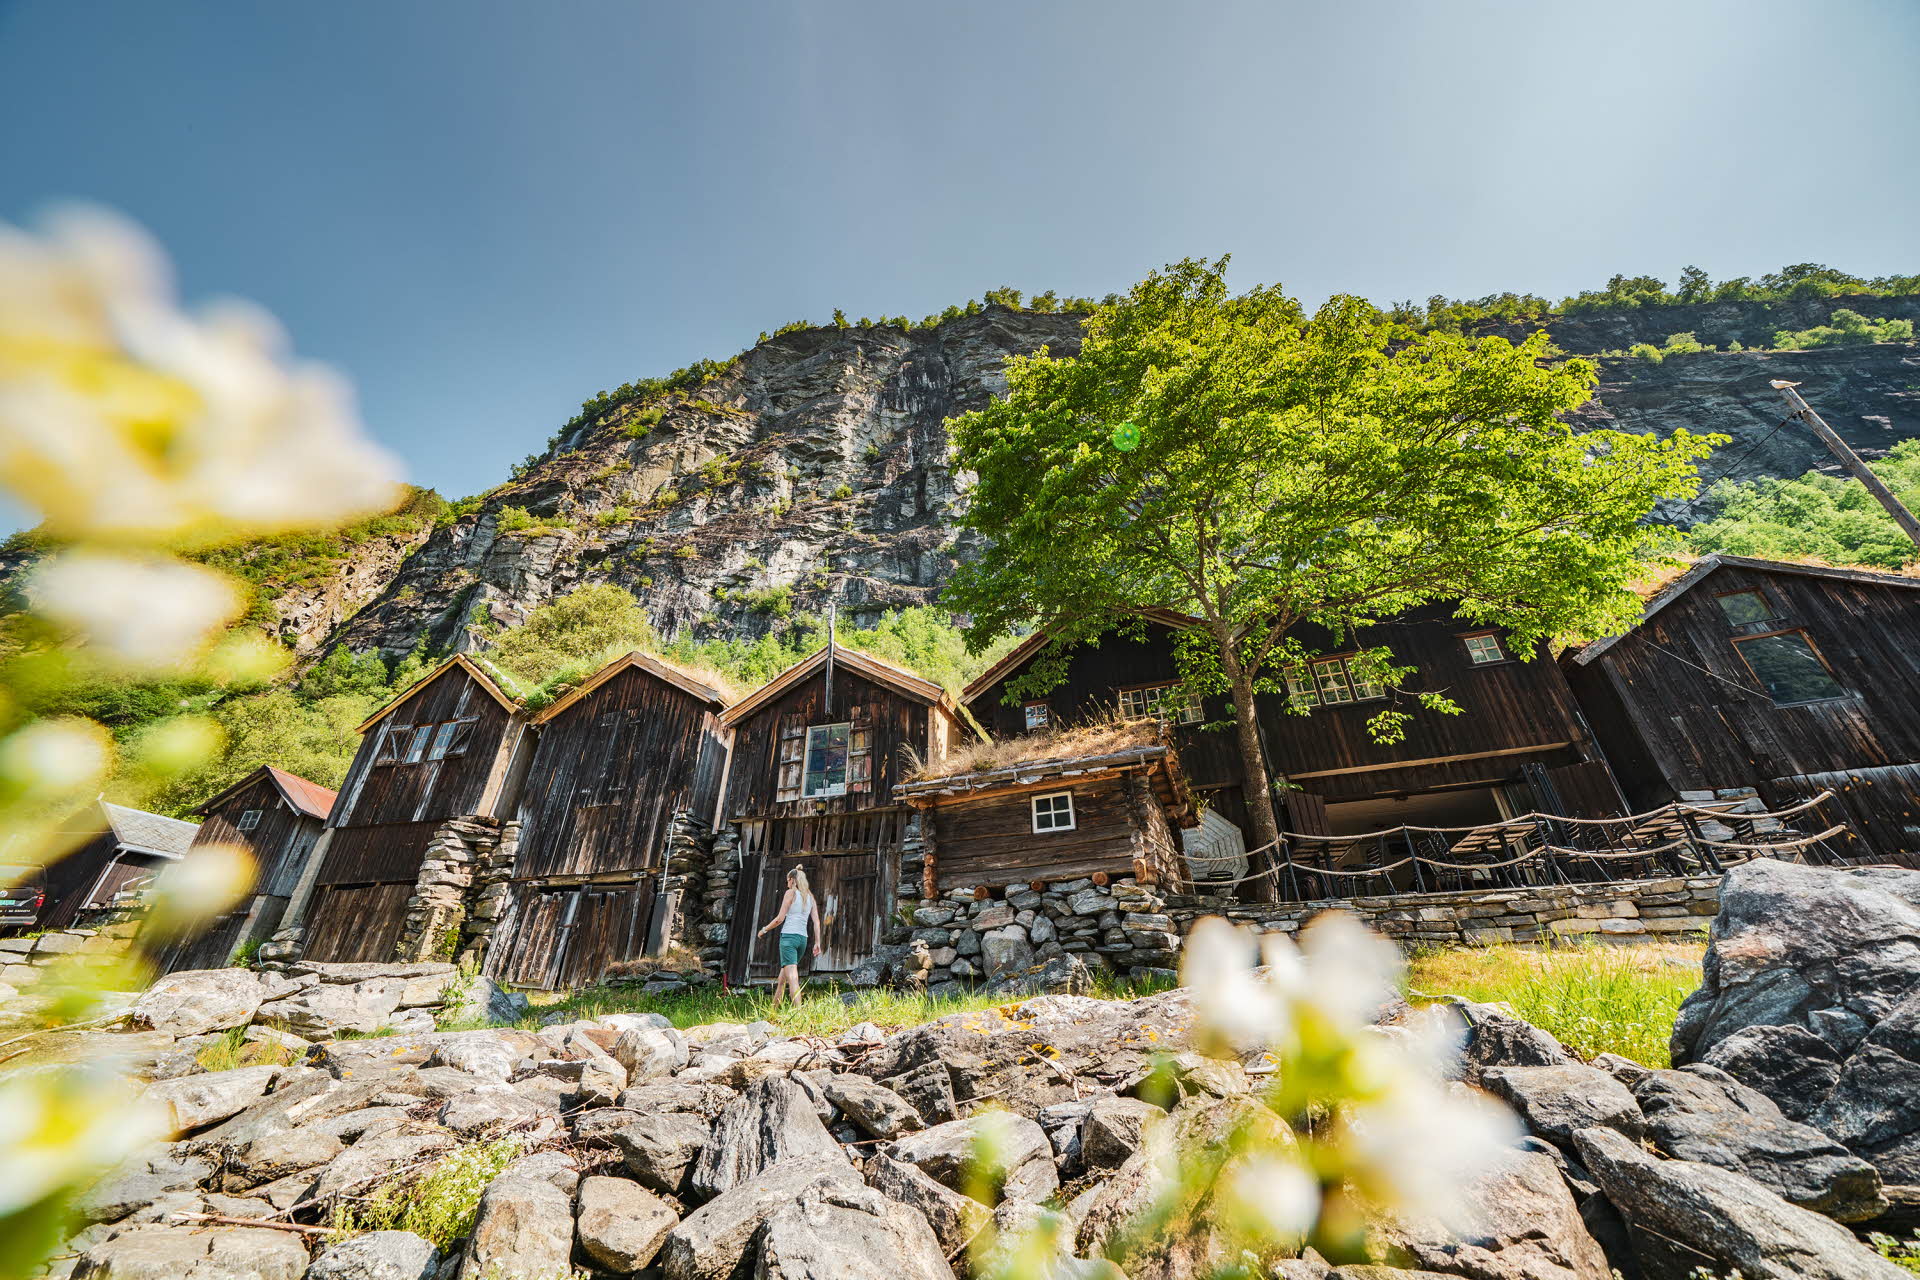 Old wooden houses next to the Geirangerfjord with steep mountains in the background